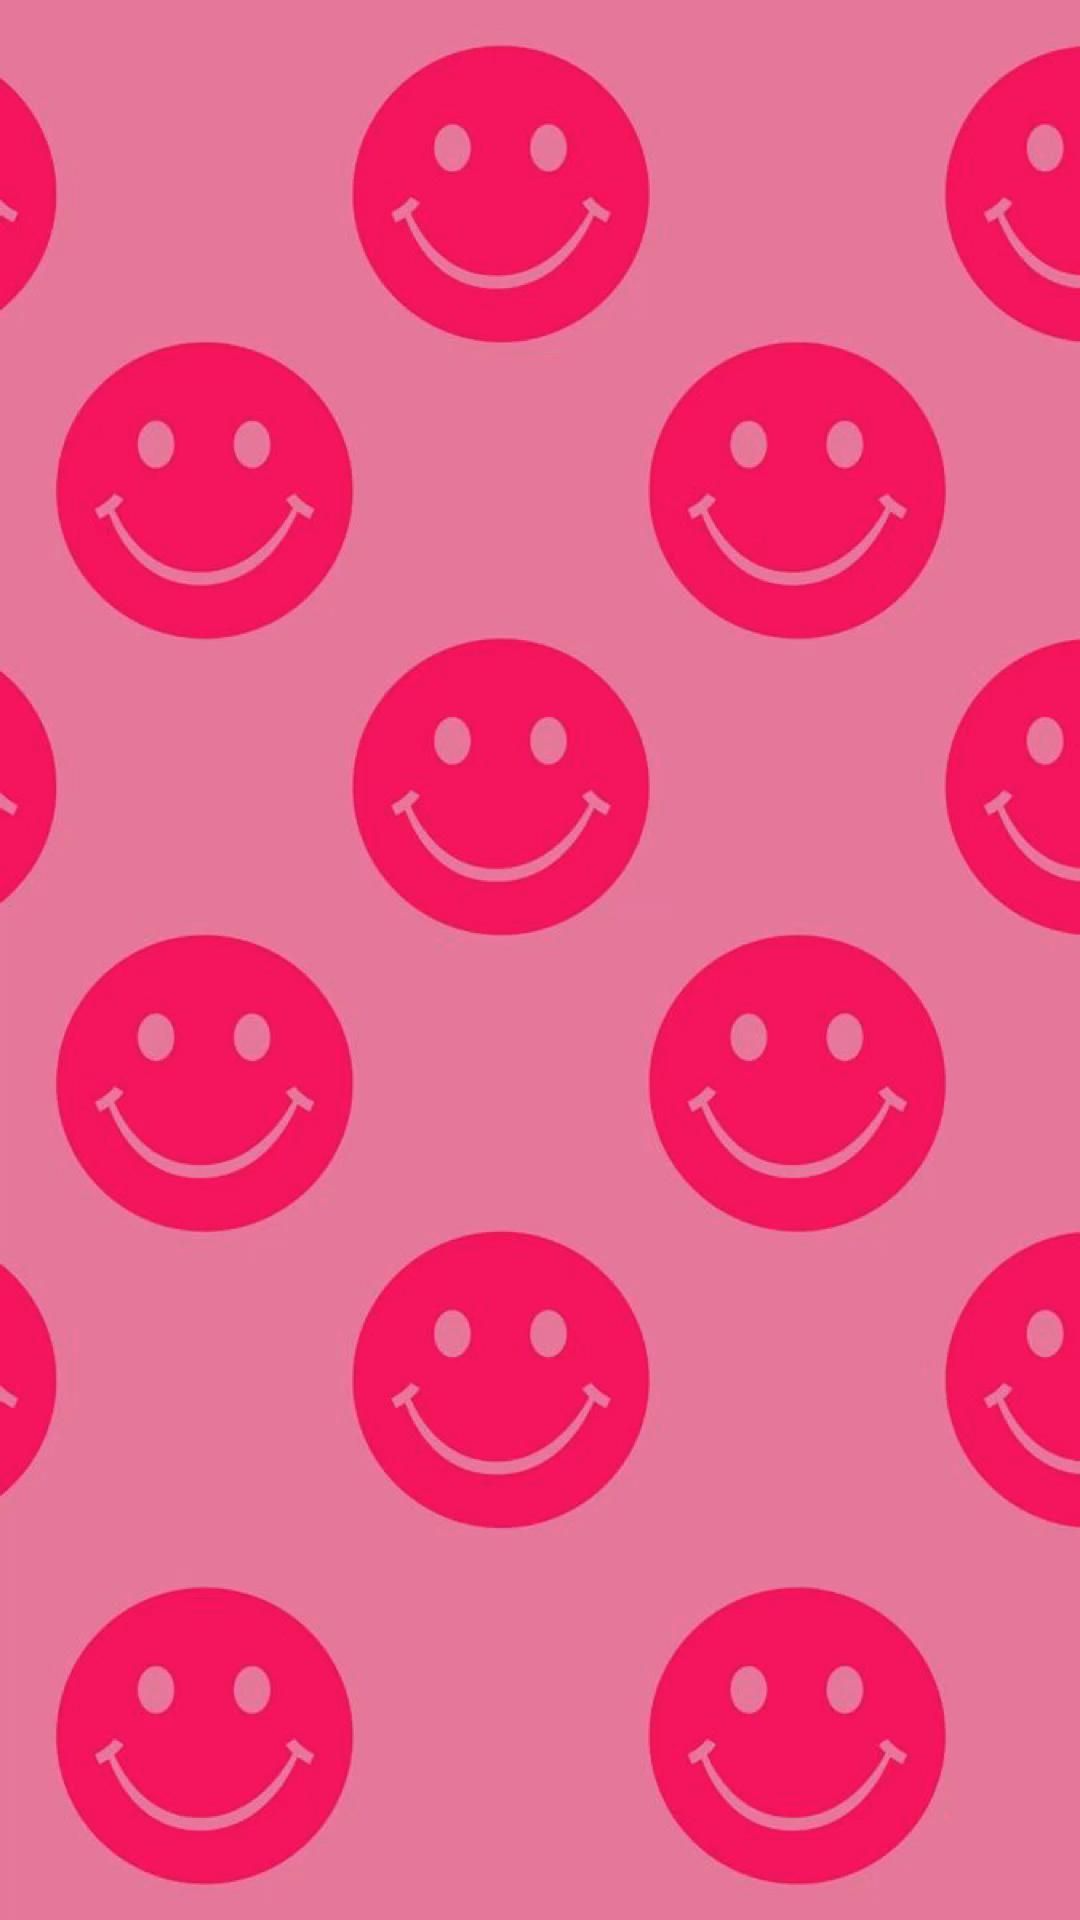 smiley faces :). Preppy wallpaper, iPhone wallpaper pattern, Preppy wall collage